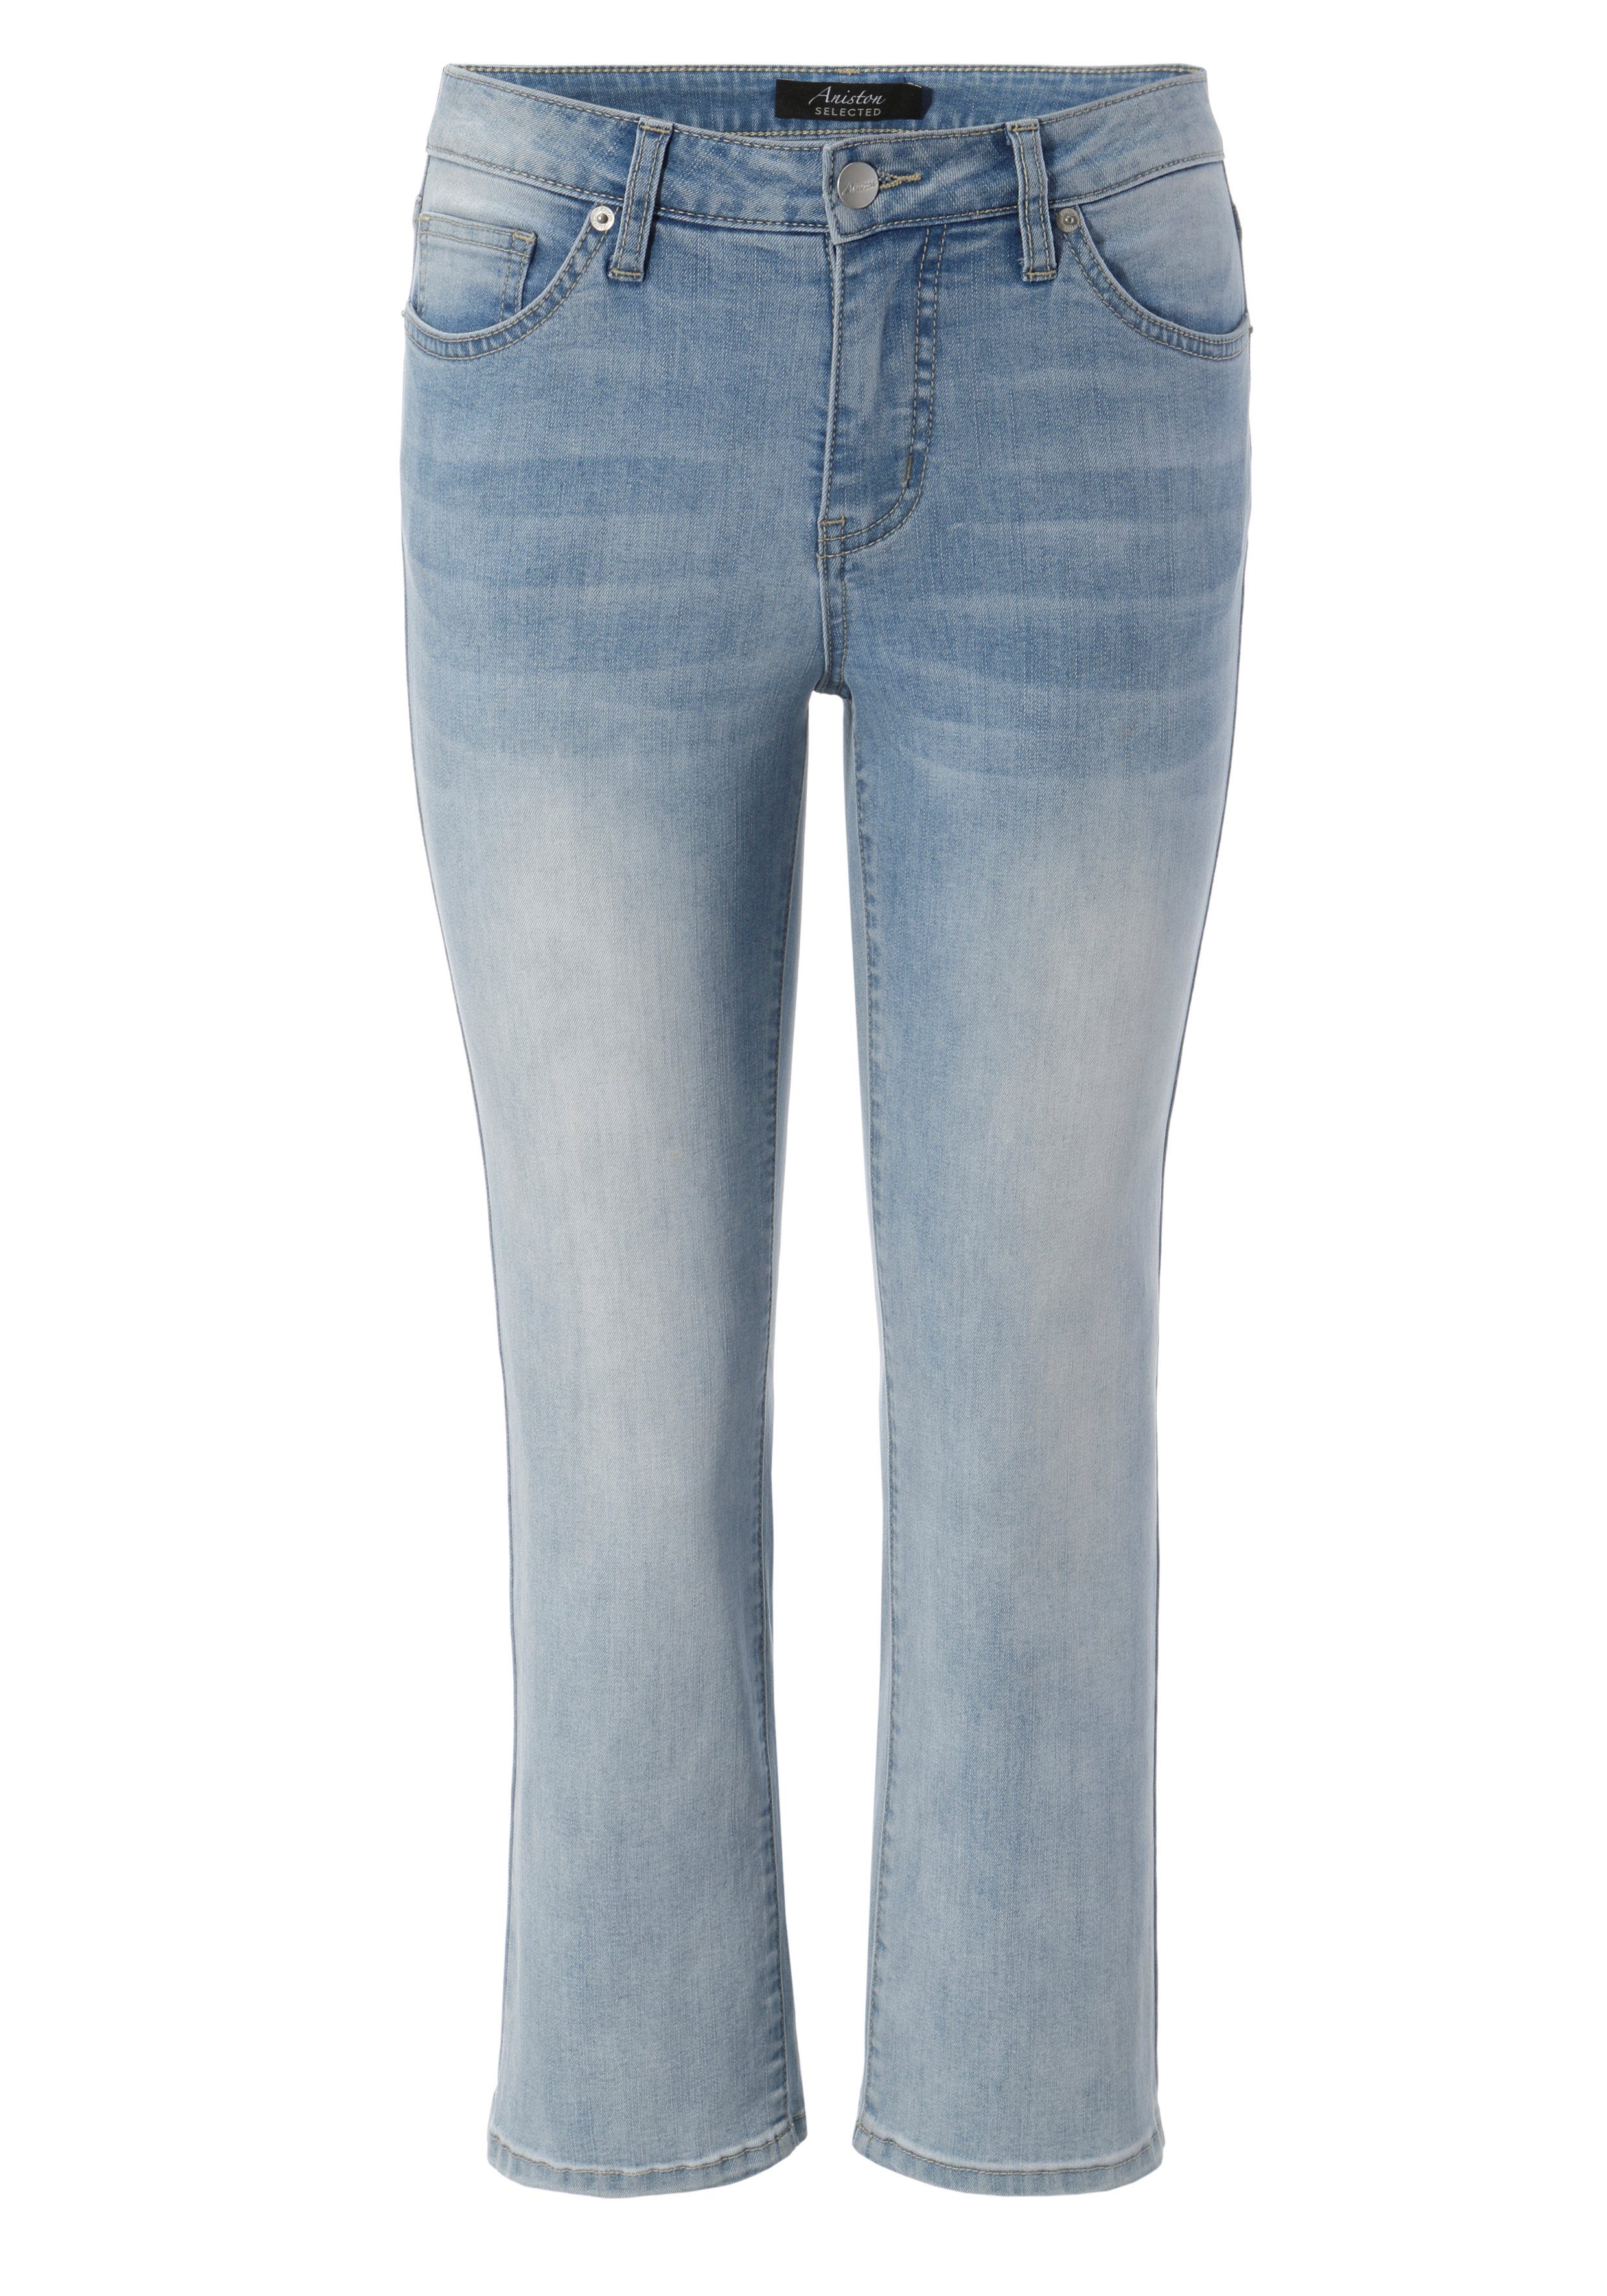 Aniston SELECTED Straight-Jeans in verkürzter Länge cropped light-blue-washed